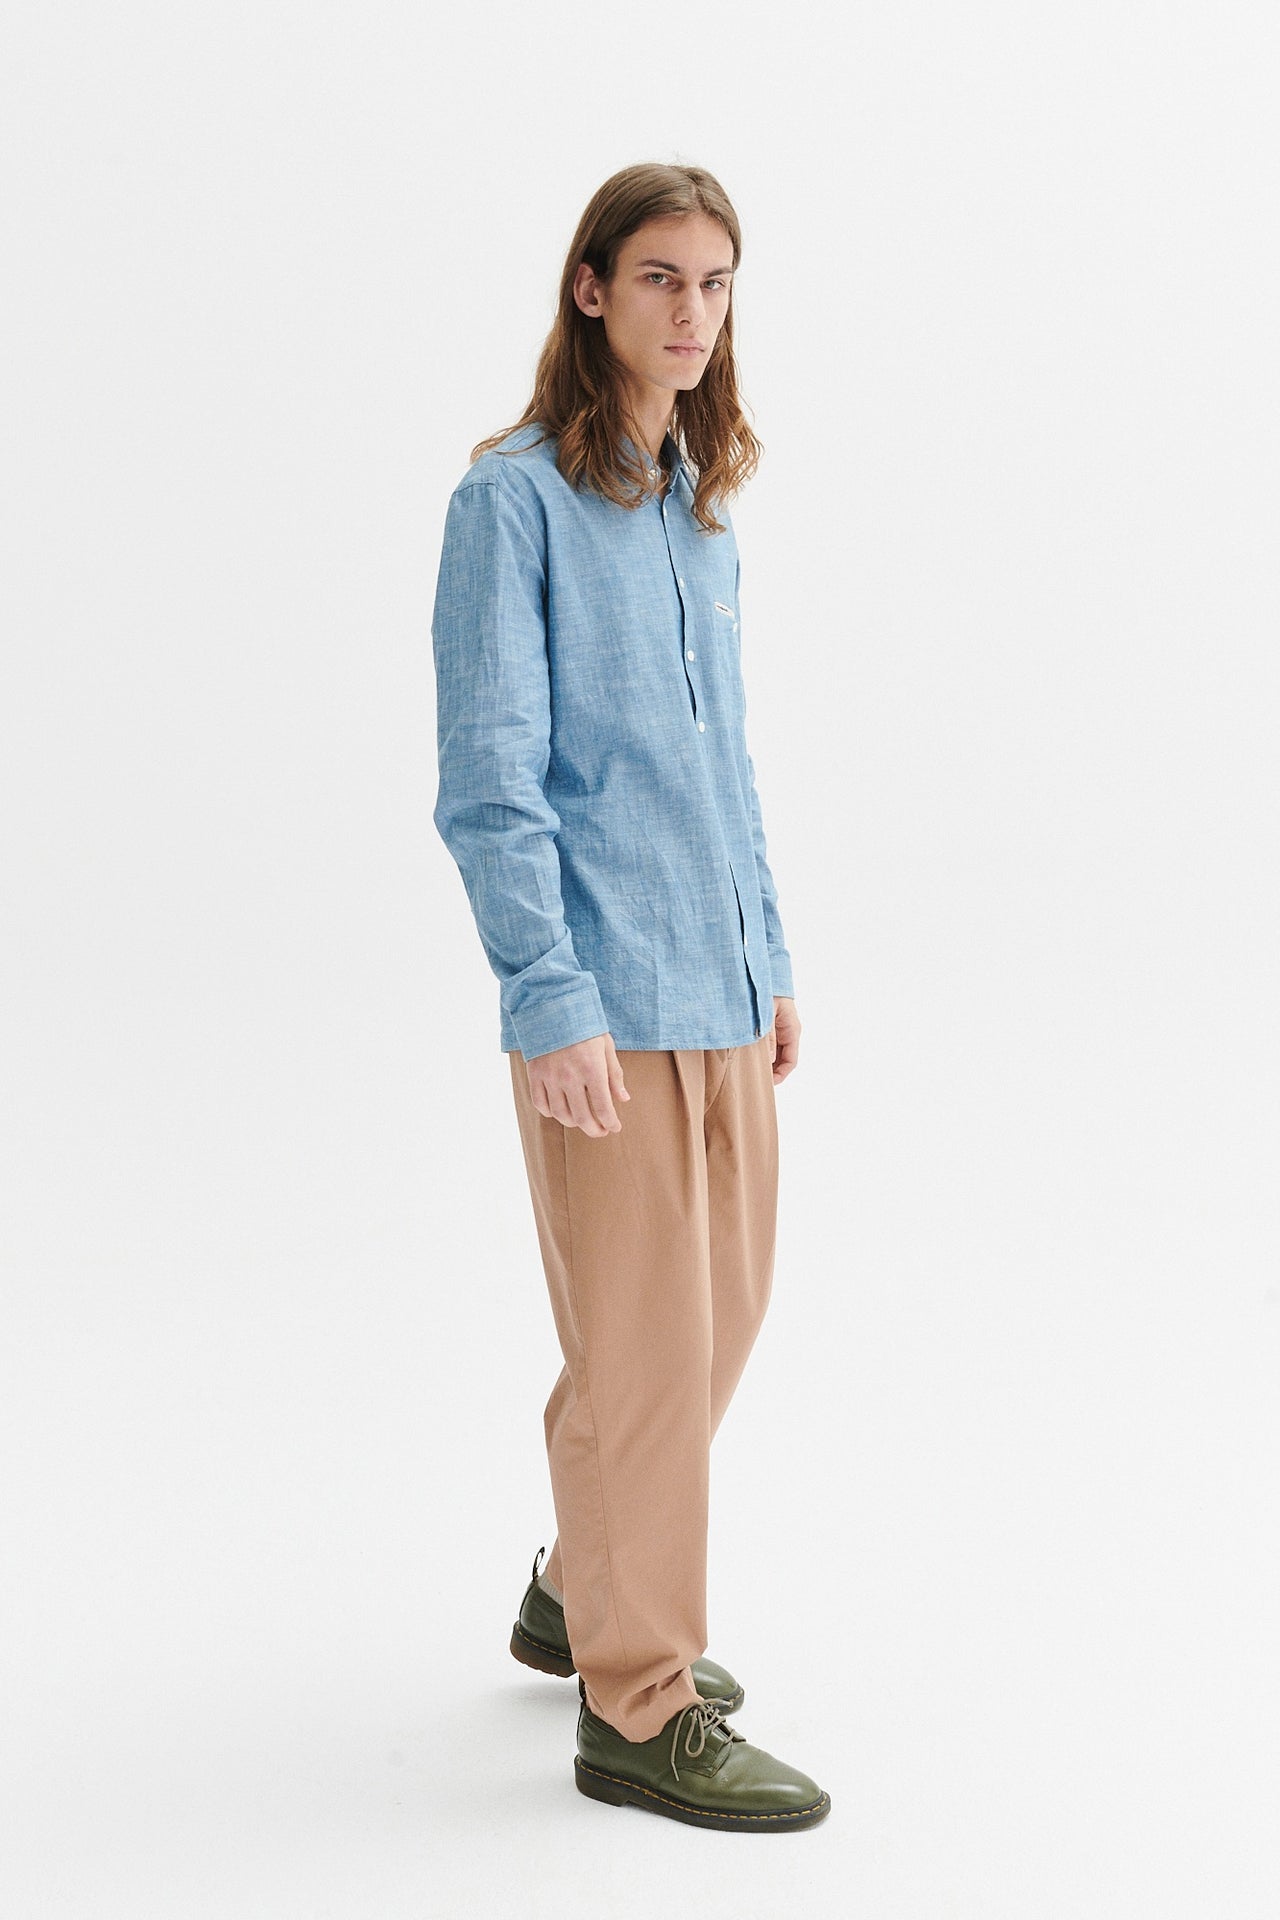 Proper Shirt in a Blue Japanese Chambray Cotton with a red and white striped selvedge